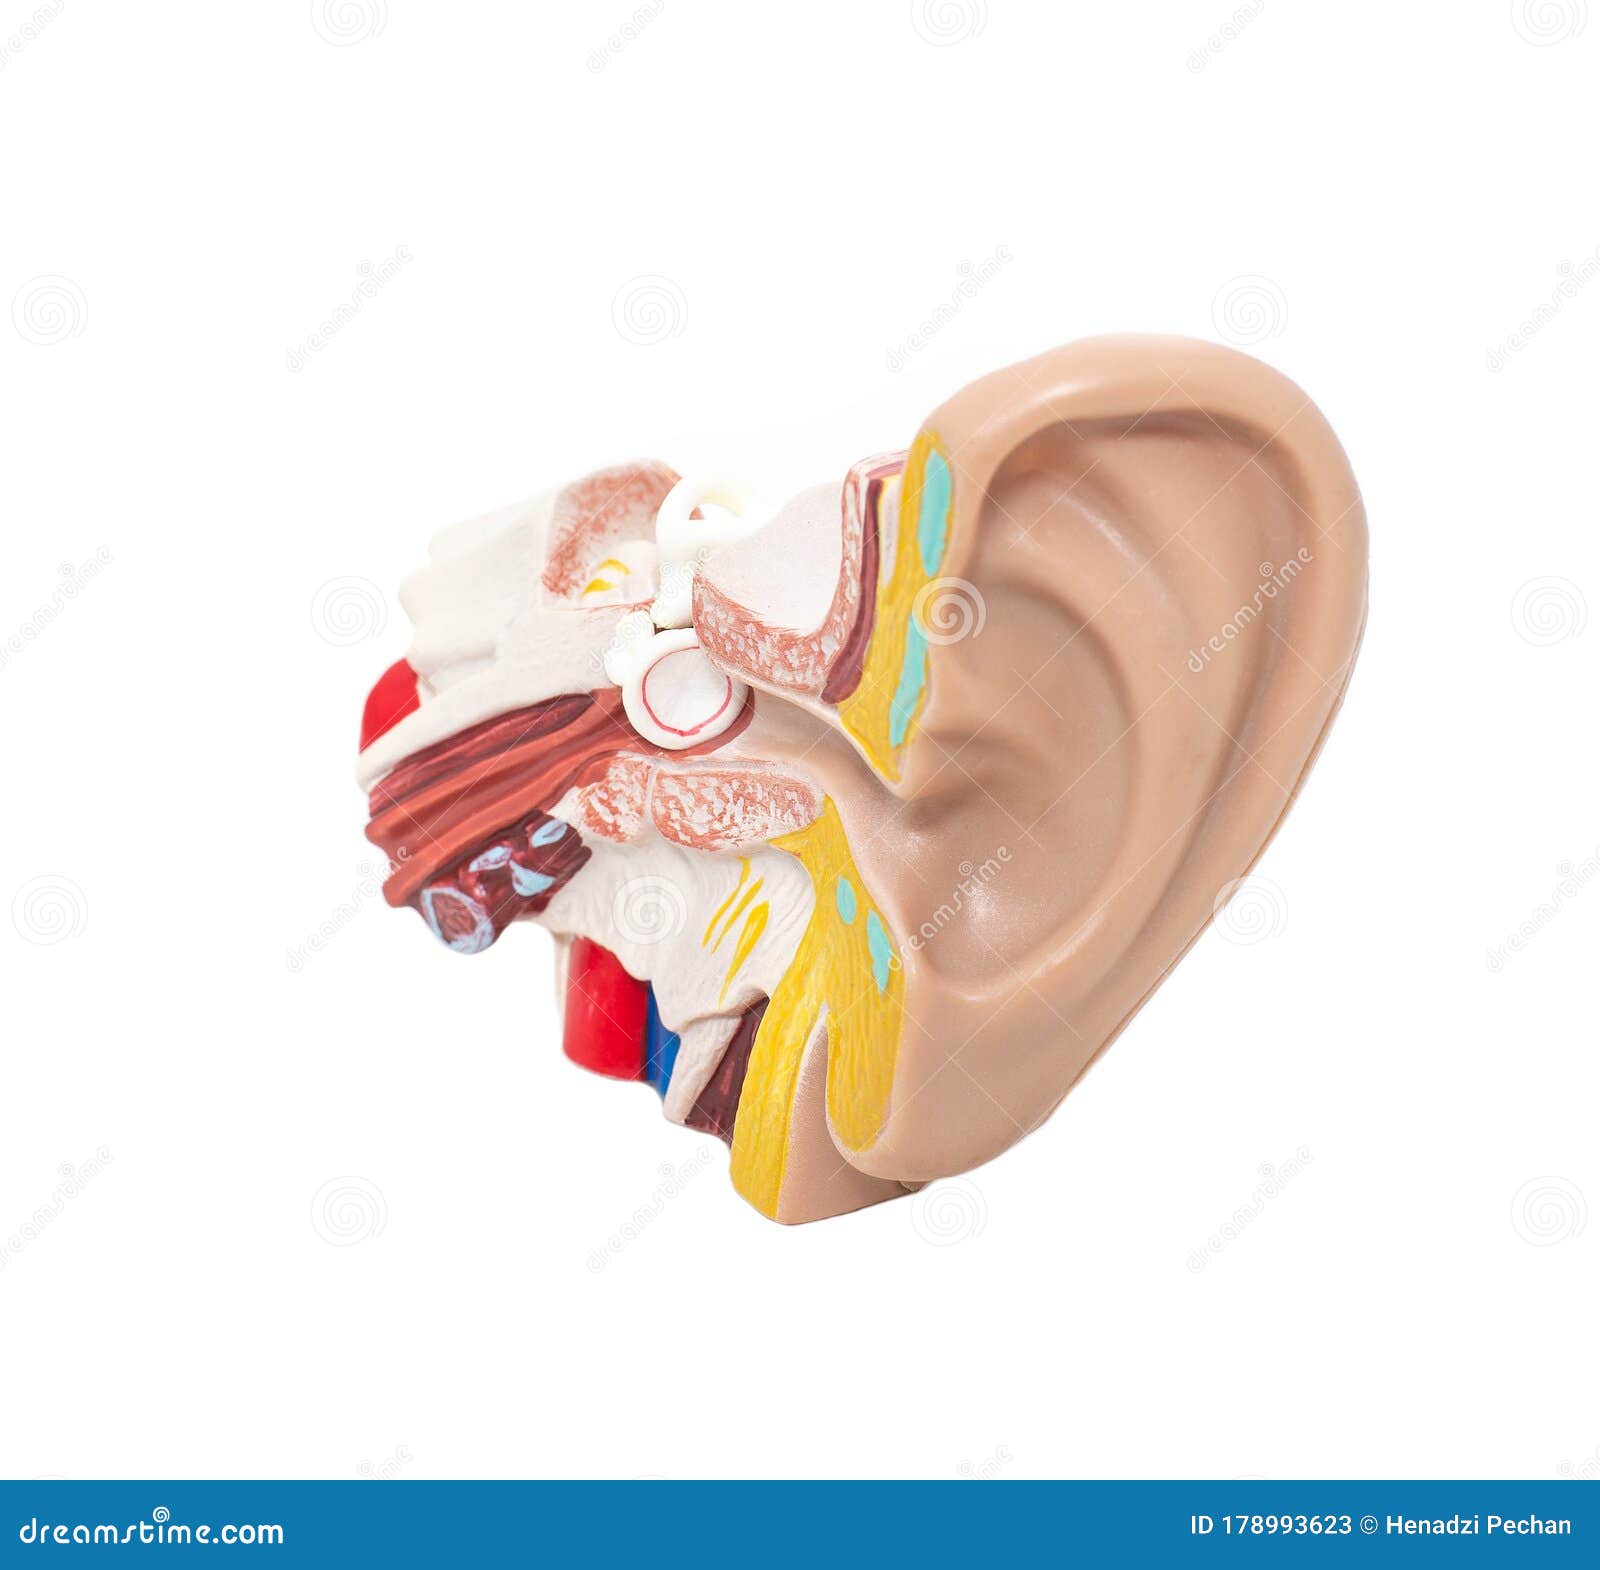 mock ear with eardrum and auditory tube on a white background, isolate. the concept of diseases in otolaryngology, sound